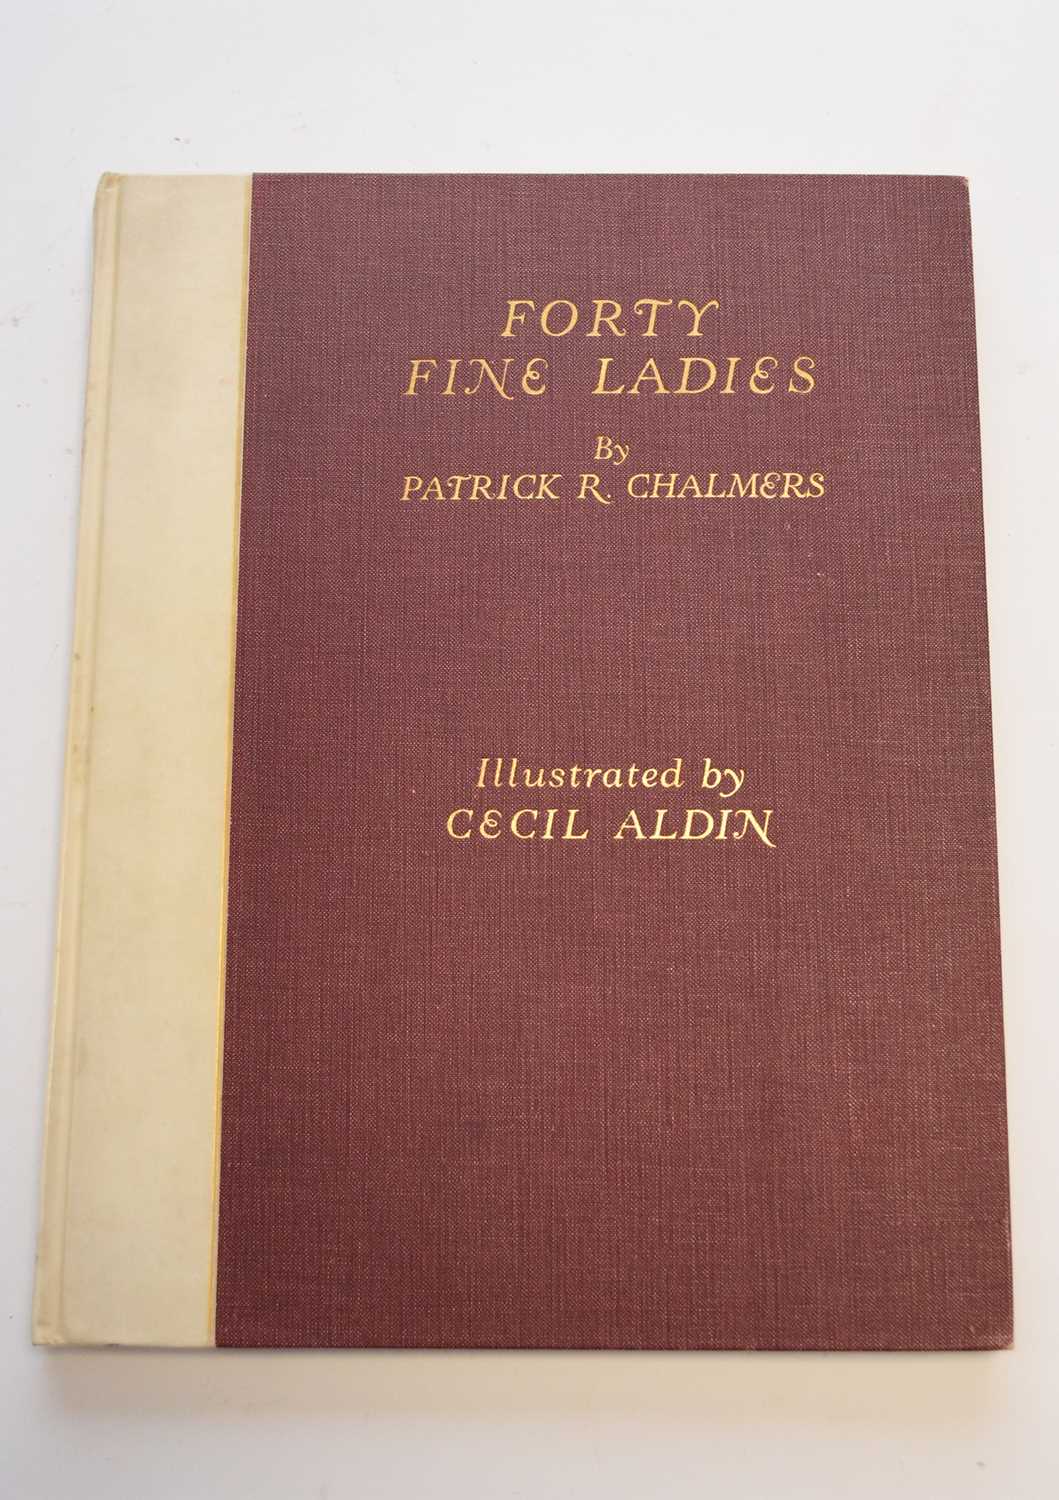 Lot 35 - Chalmers, Patrick, Forty Fine Ladies